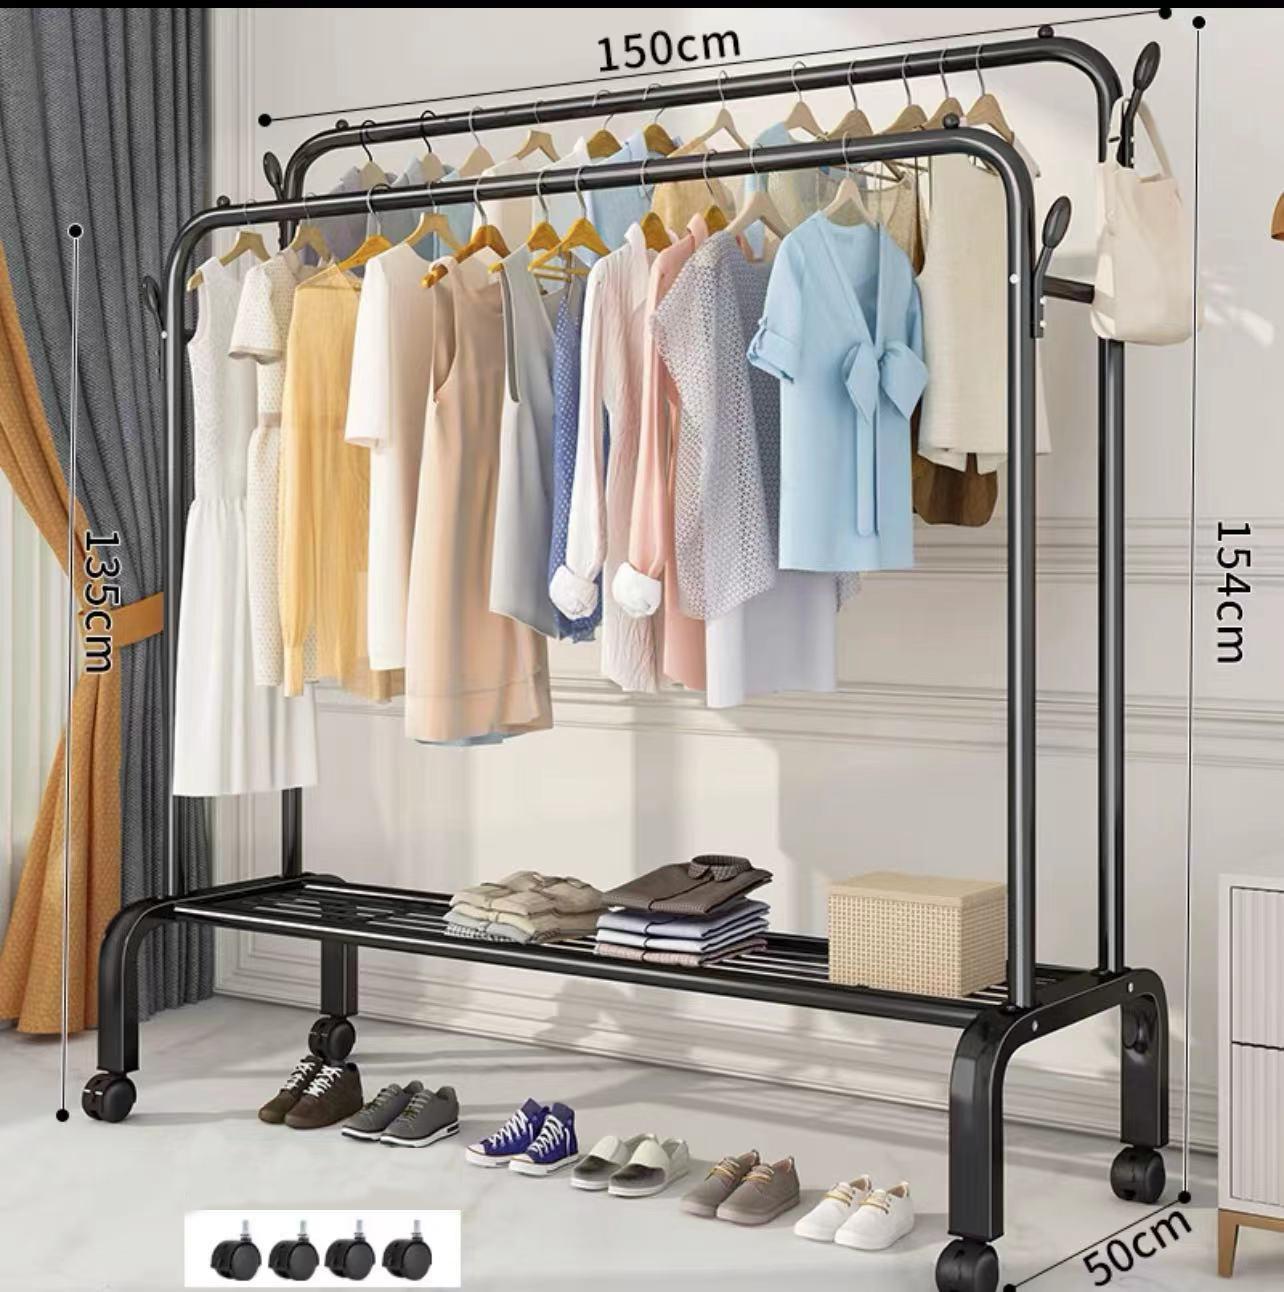 Multifunctional free-standing clothes hanger 150x154cm - black